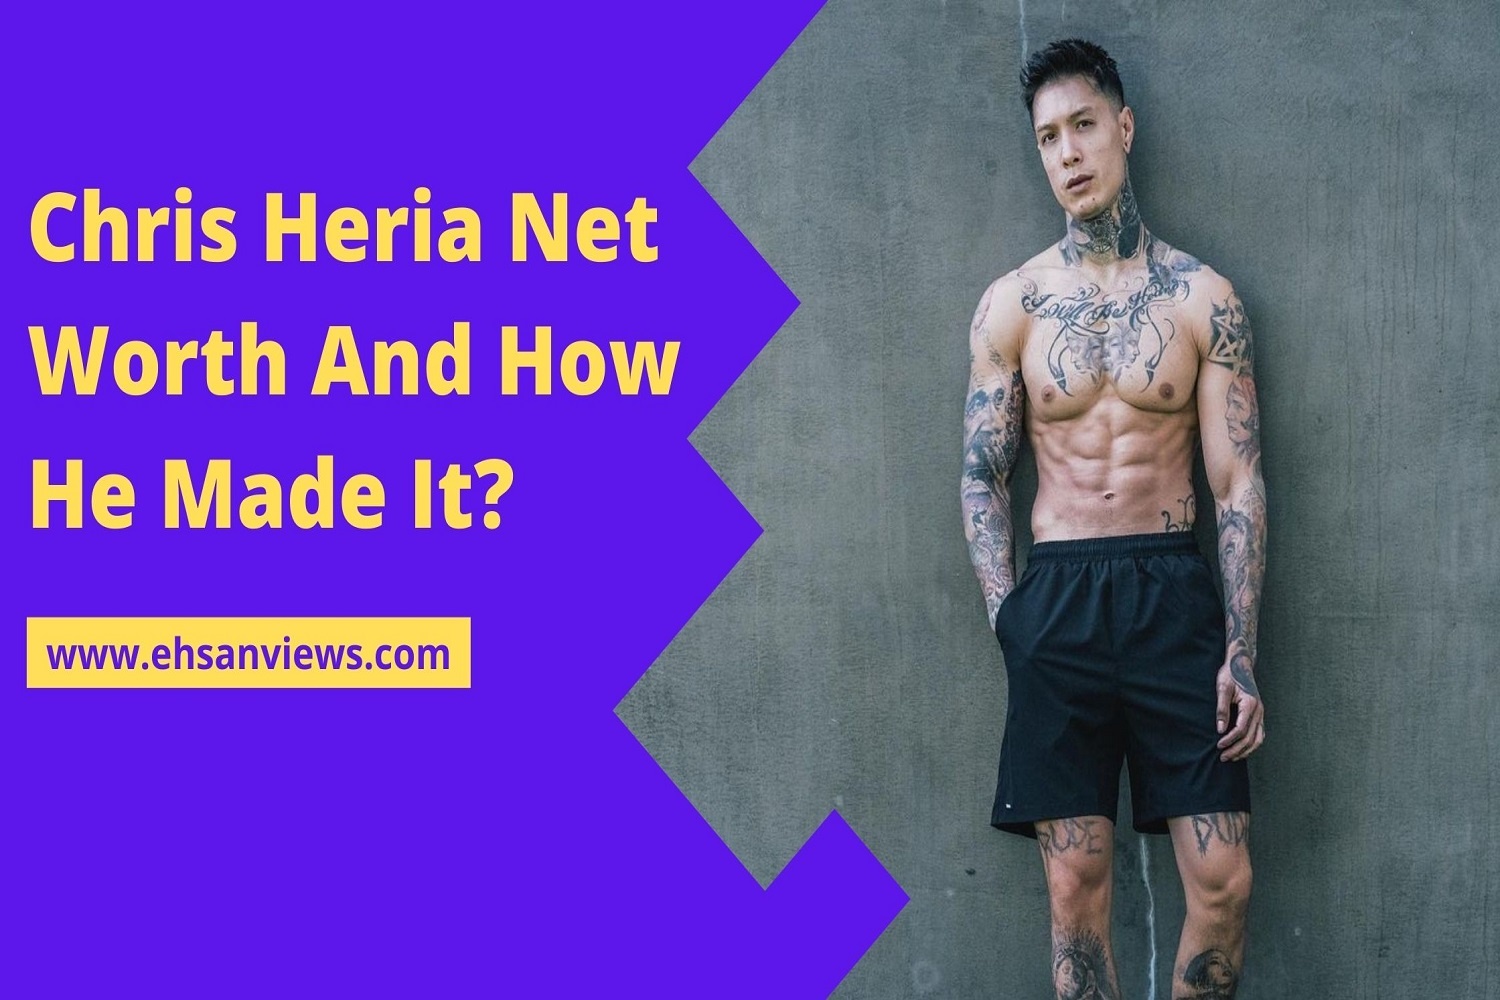 Chris Heria Net Worth (2022) And How He Made It? | Abdul Ehsan | Entrepreneur and Digital Marketing Consultant in Sri Lanka